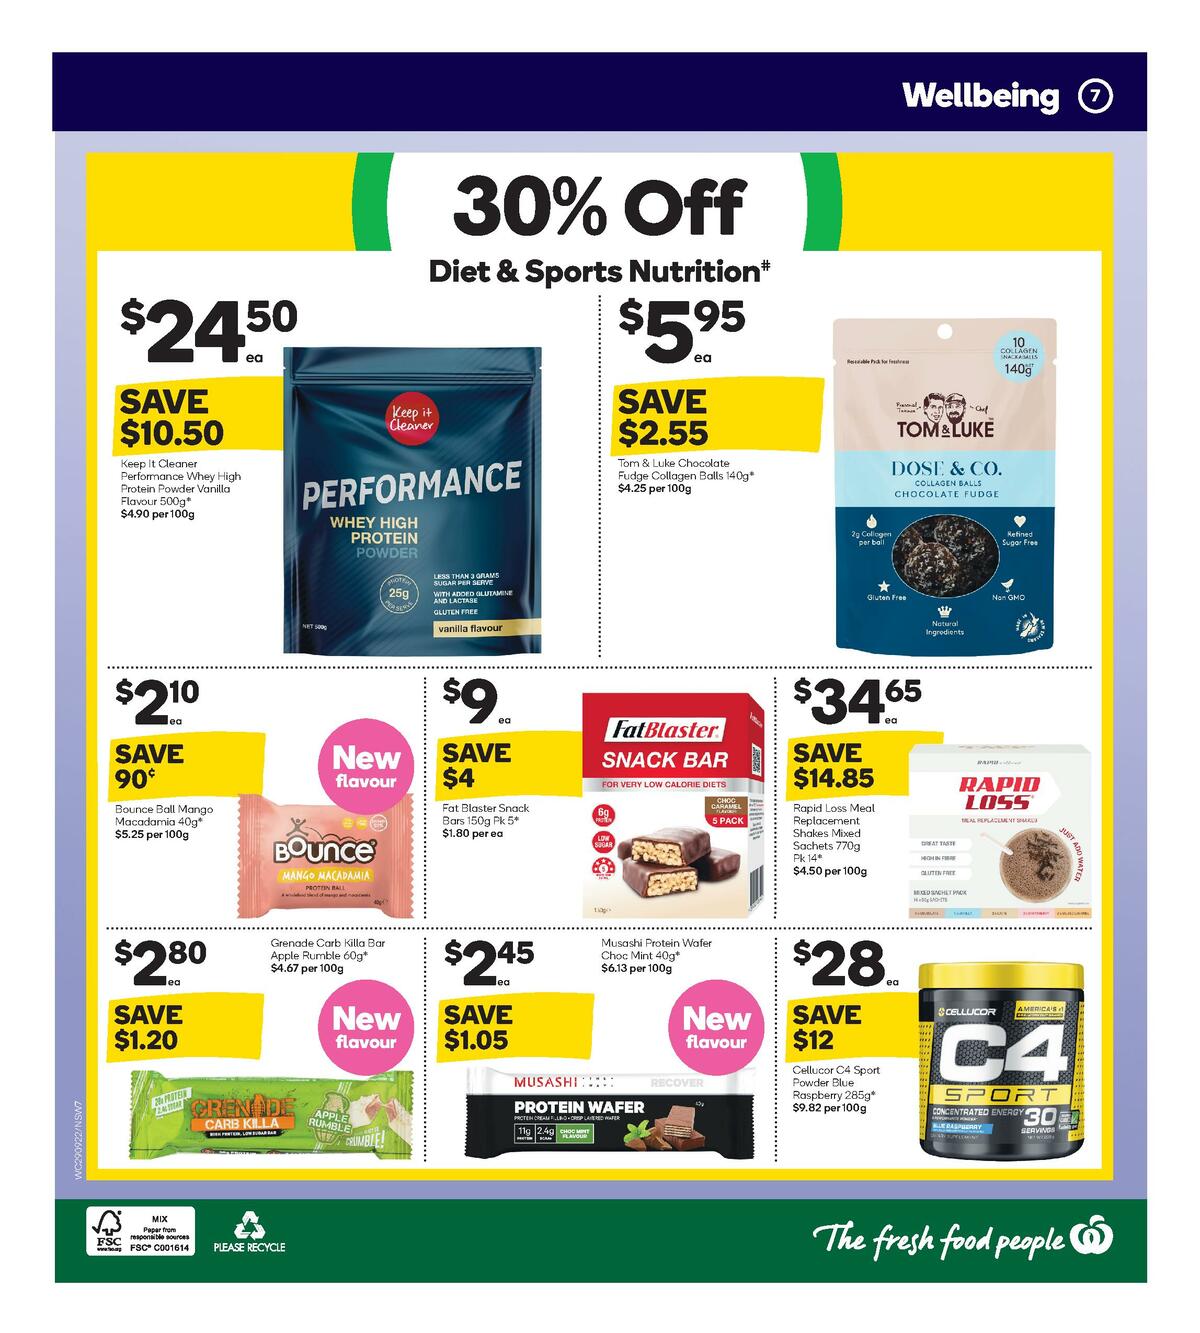 Woolworths Spring Health & Beauty Catalogues from 29 September